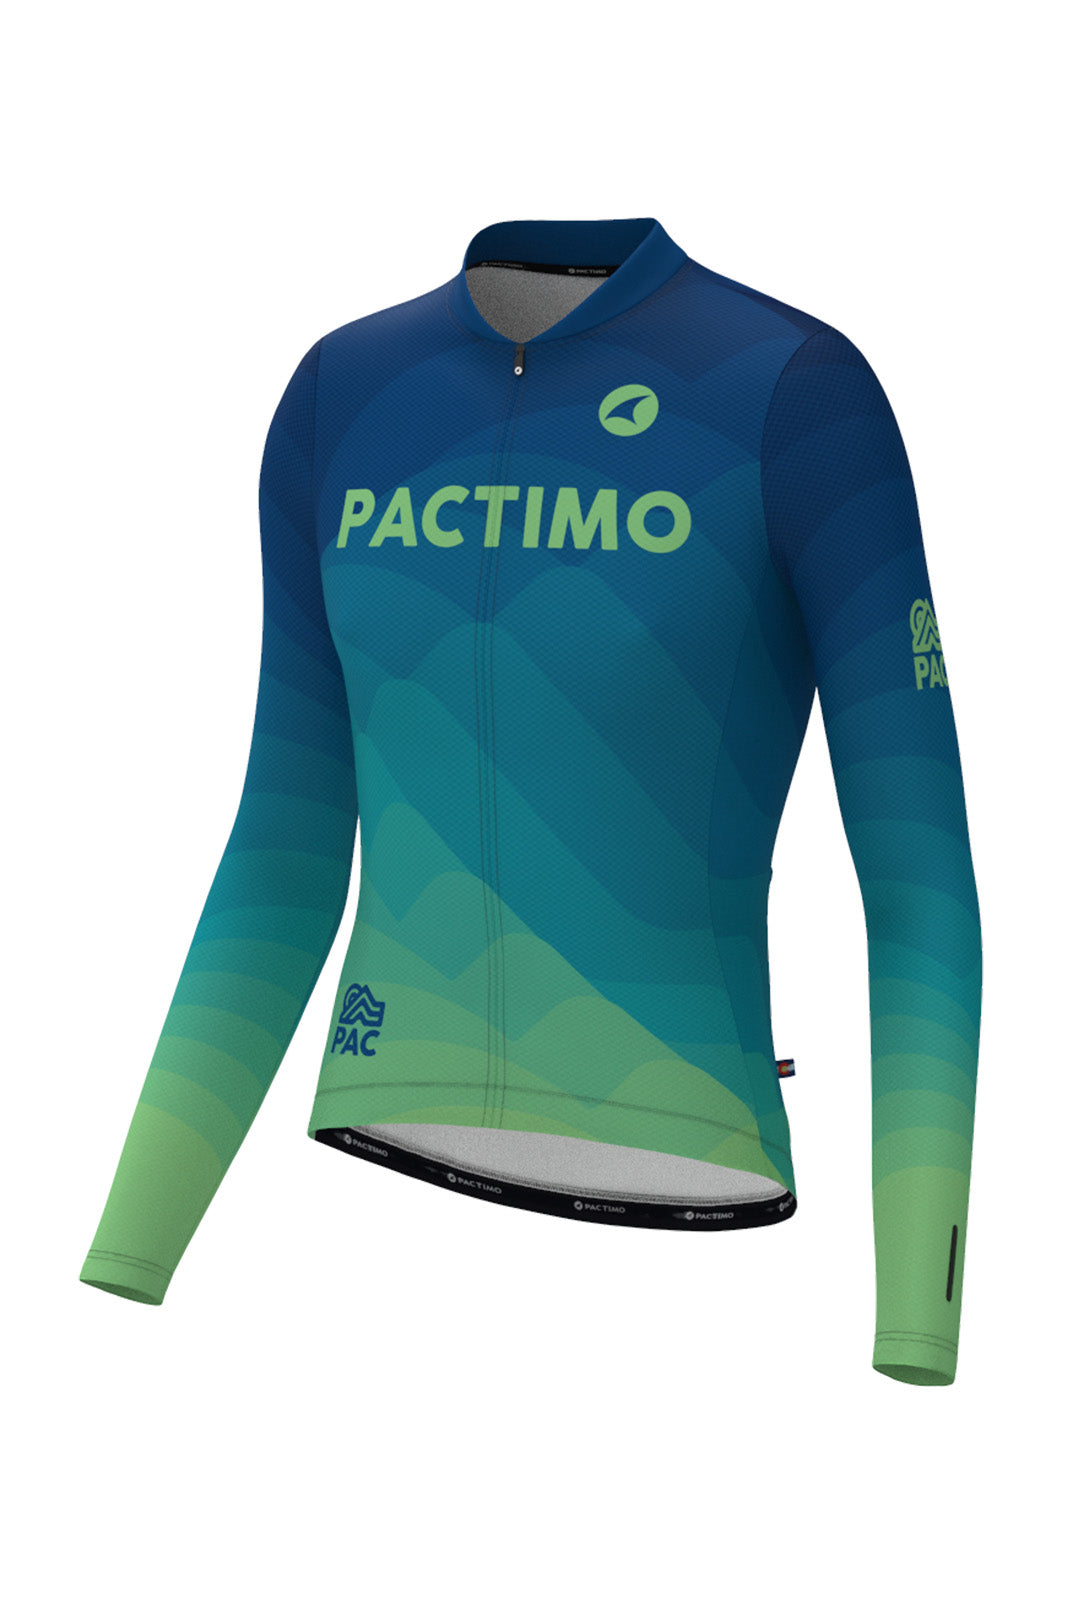 Men's PAC Ascent Aero Long Sleeve Cycling Jersey - Twighlight Front View